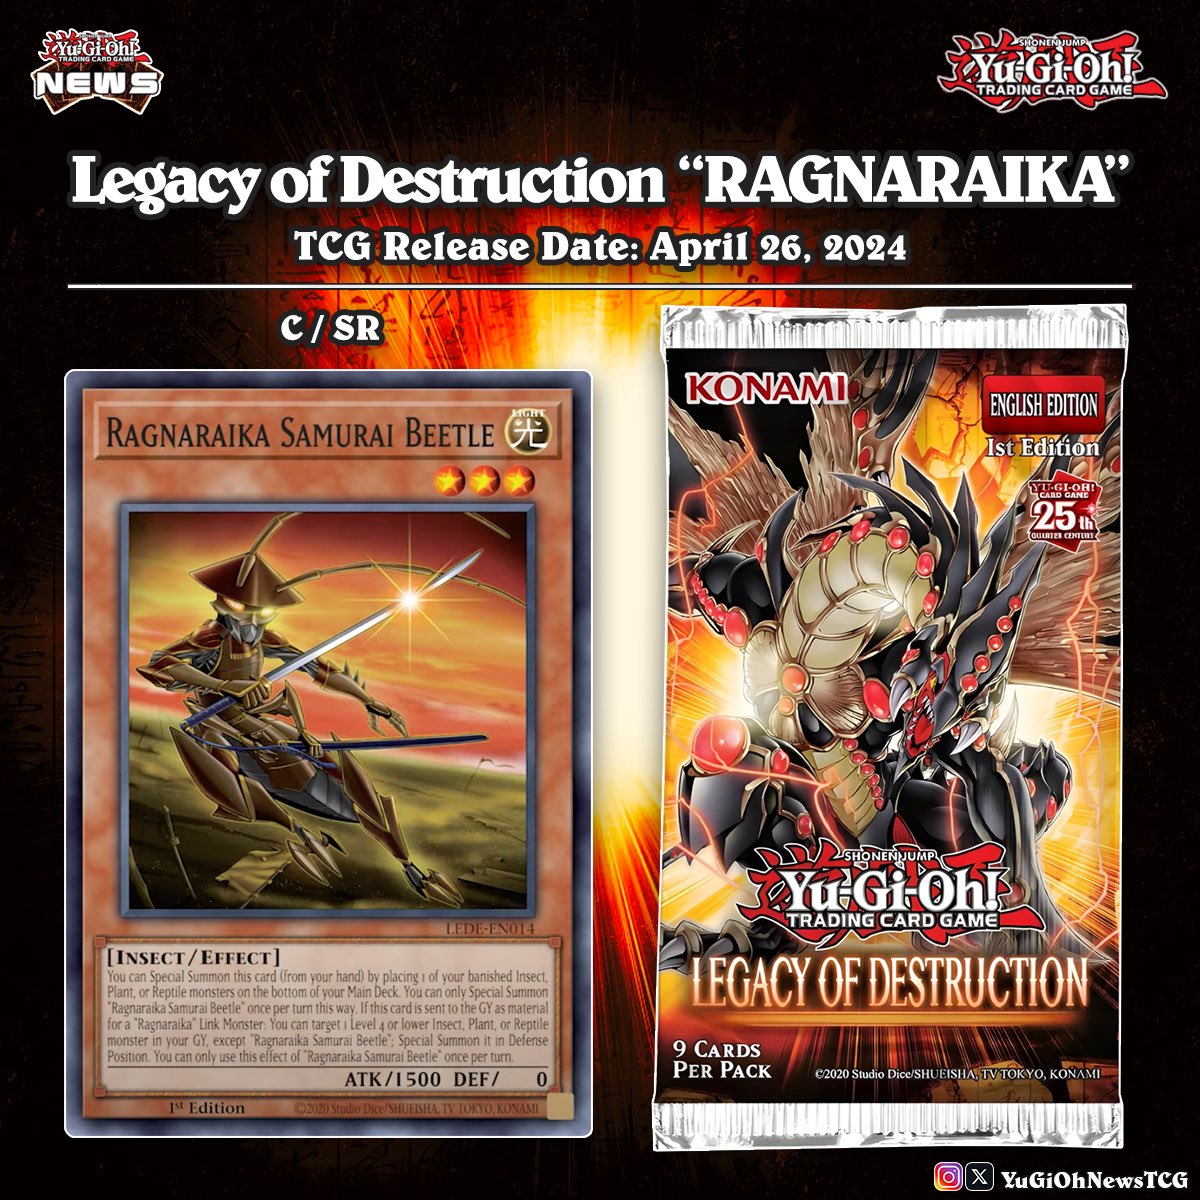 ❰𝗟𝗲𝗴𝗮𝗰𝘆 𝗼𝗳 𝗗𝗲𝘀𝘁𝗿𝘂𝗰𝘁𝗶𝗼𝗻❱ Konami has unveiled the 'RAGNARAIKA' theme for the upcoming TCG set and has also disclosed the rarity of the new cards❗️🐍🕷️🕸️ #遊戯王 #YuGiOh #유희왕